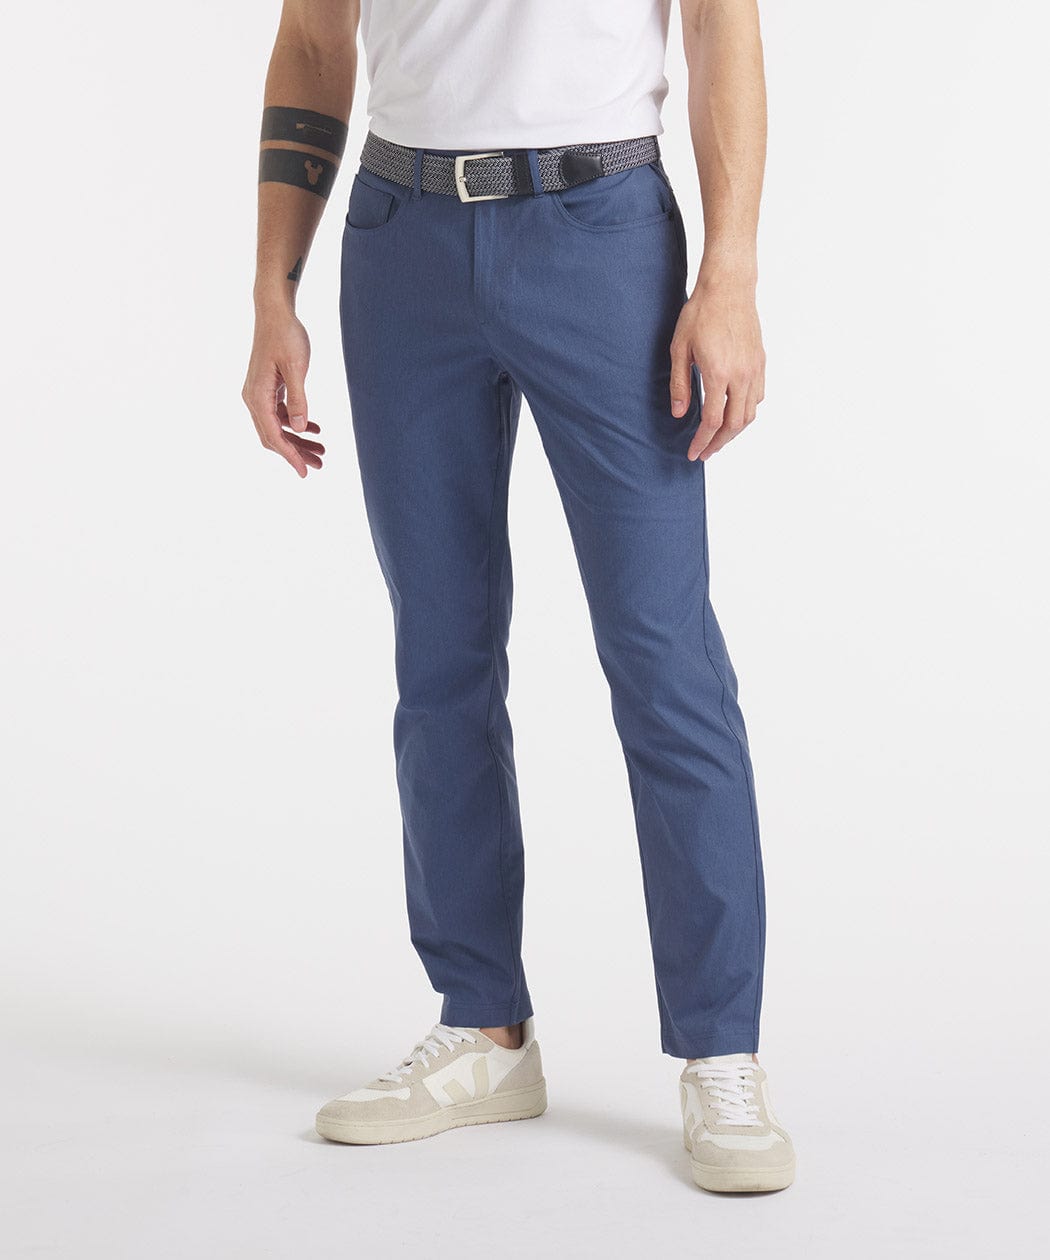 Need your input: which pair of shoes with the blue polo and white pants?  The brown or the blue pair? : r/mensfashion